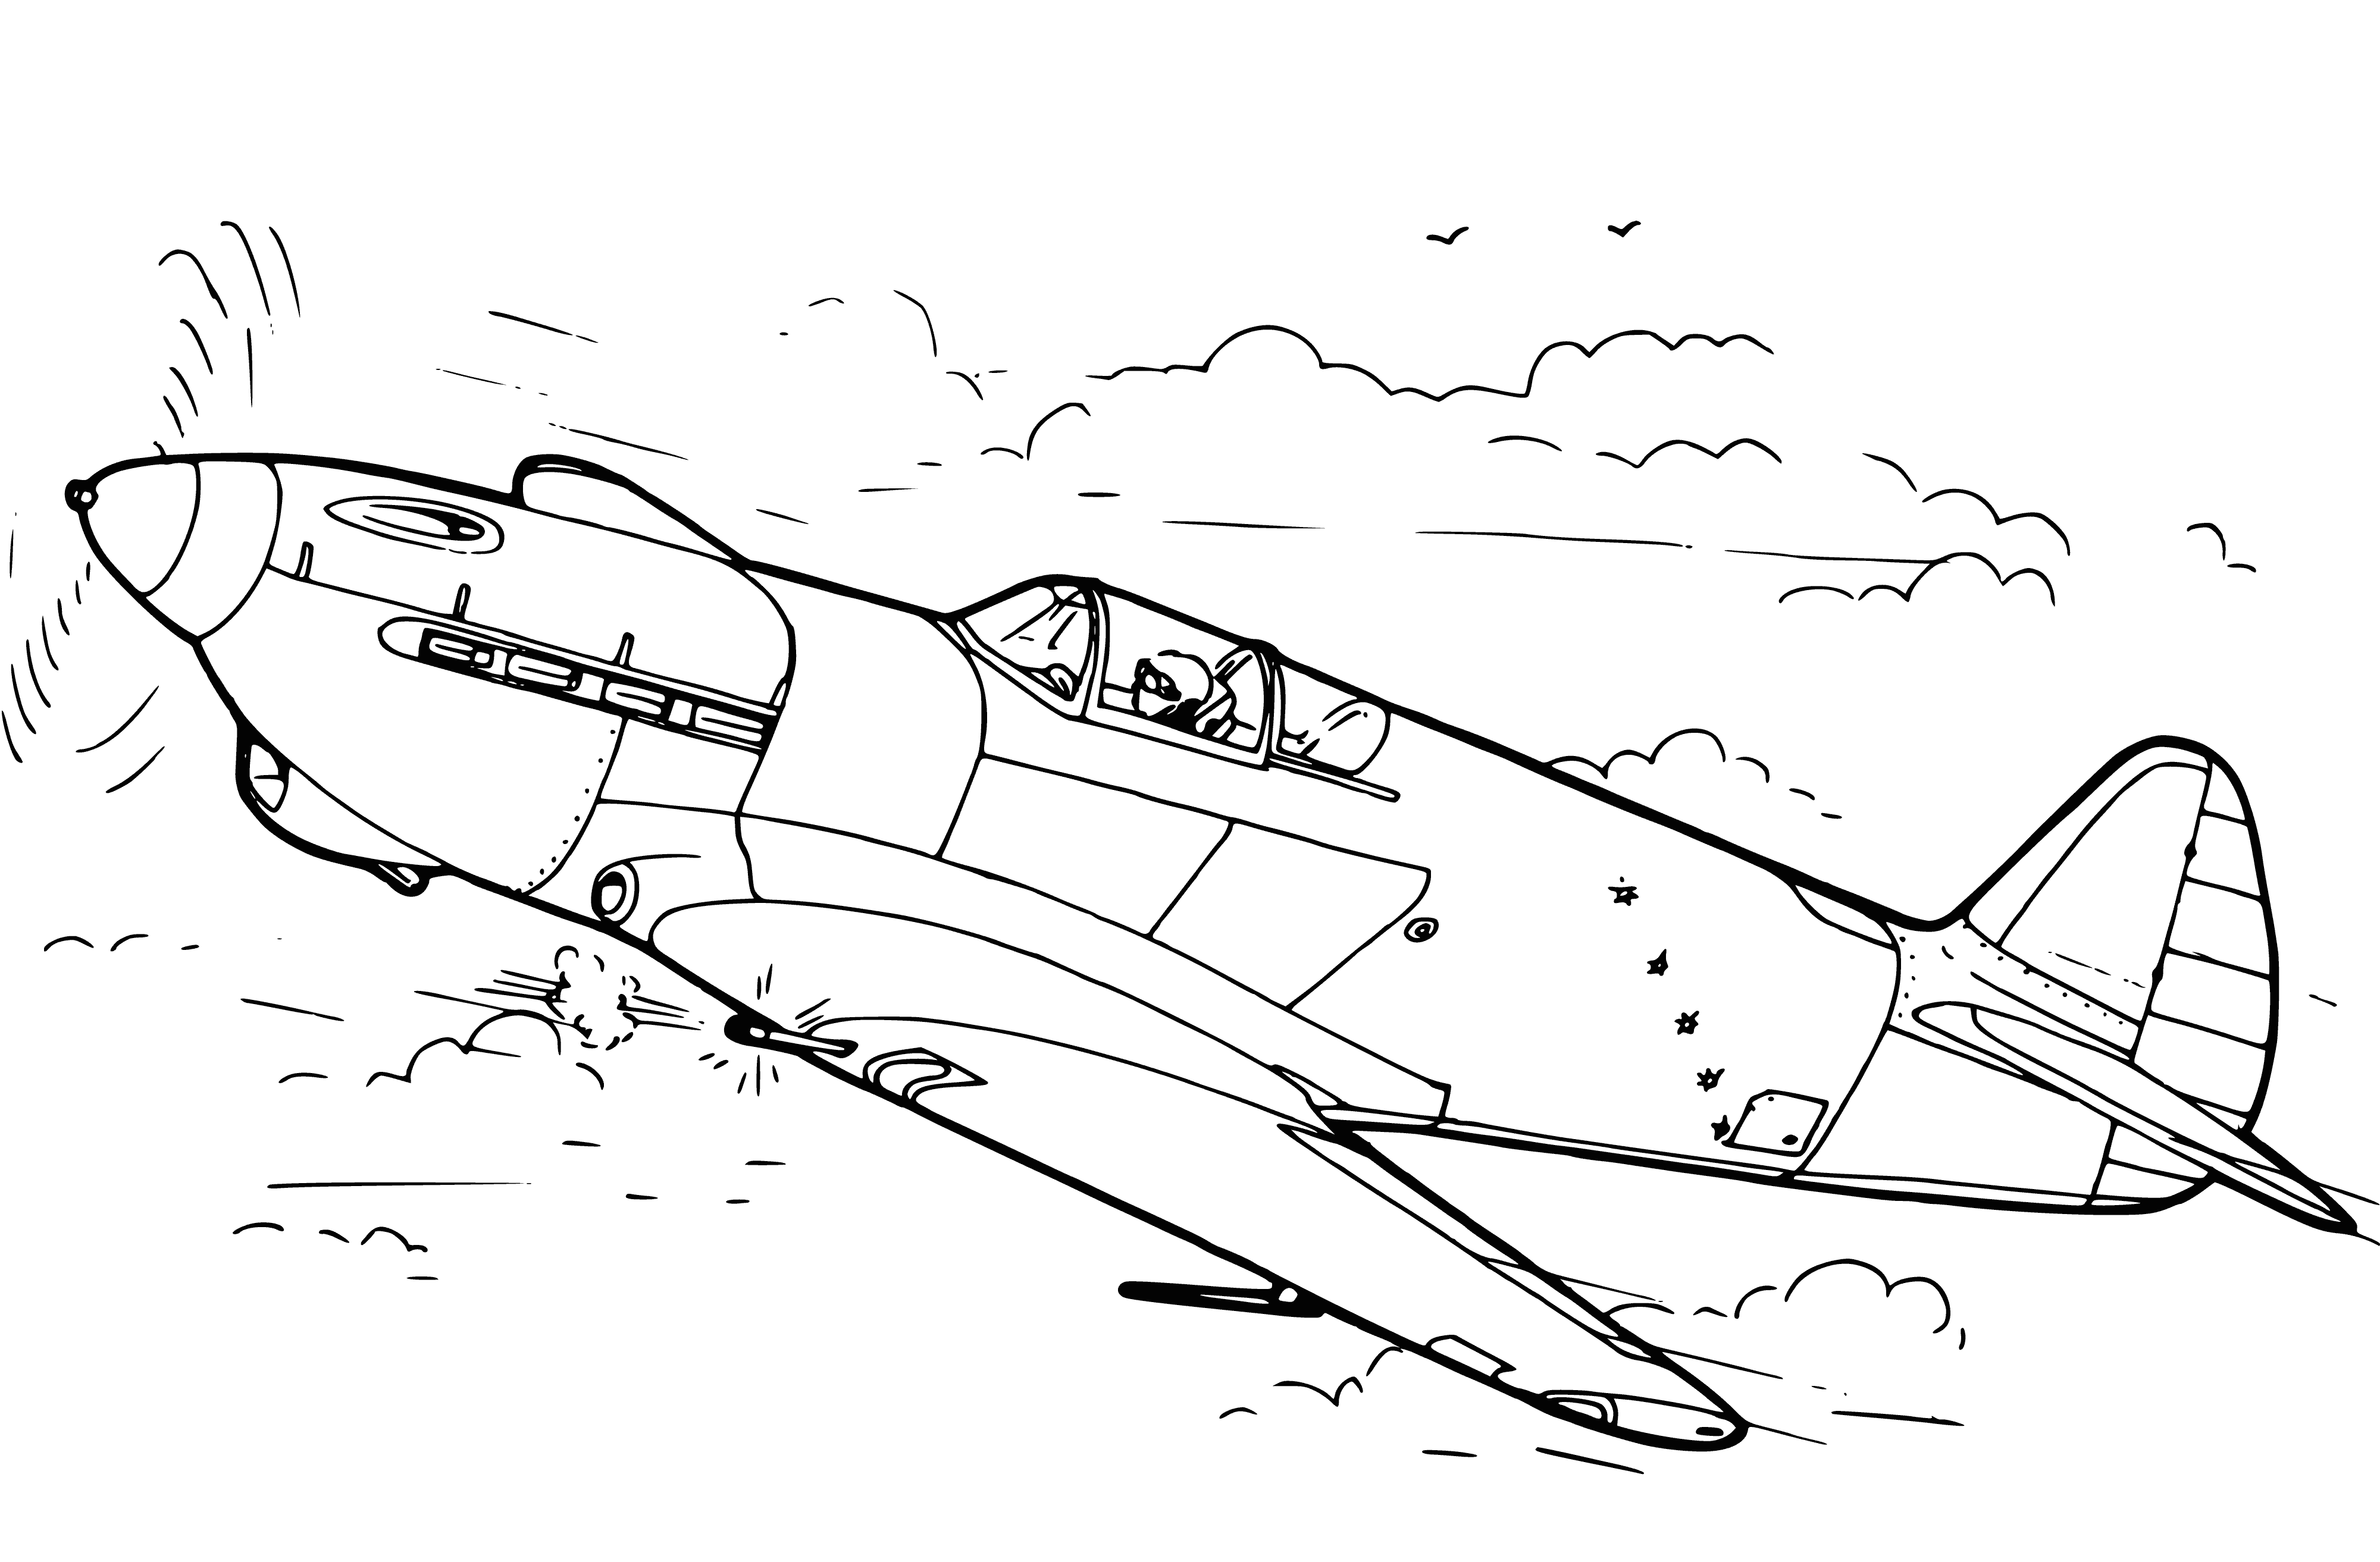 coloring page: Silver plane with red & blue stripes, two engines, missiles under wings.